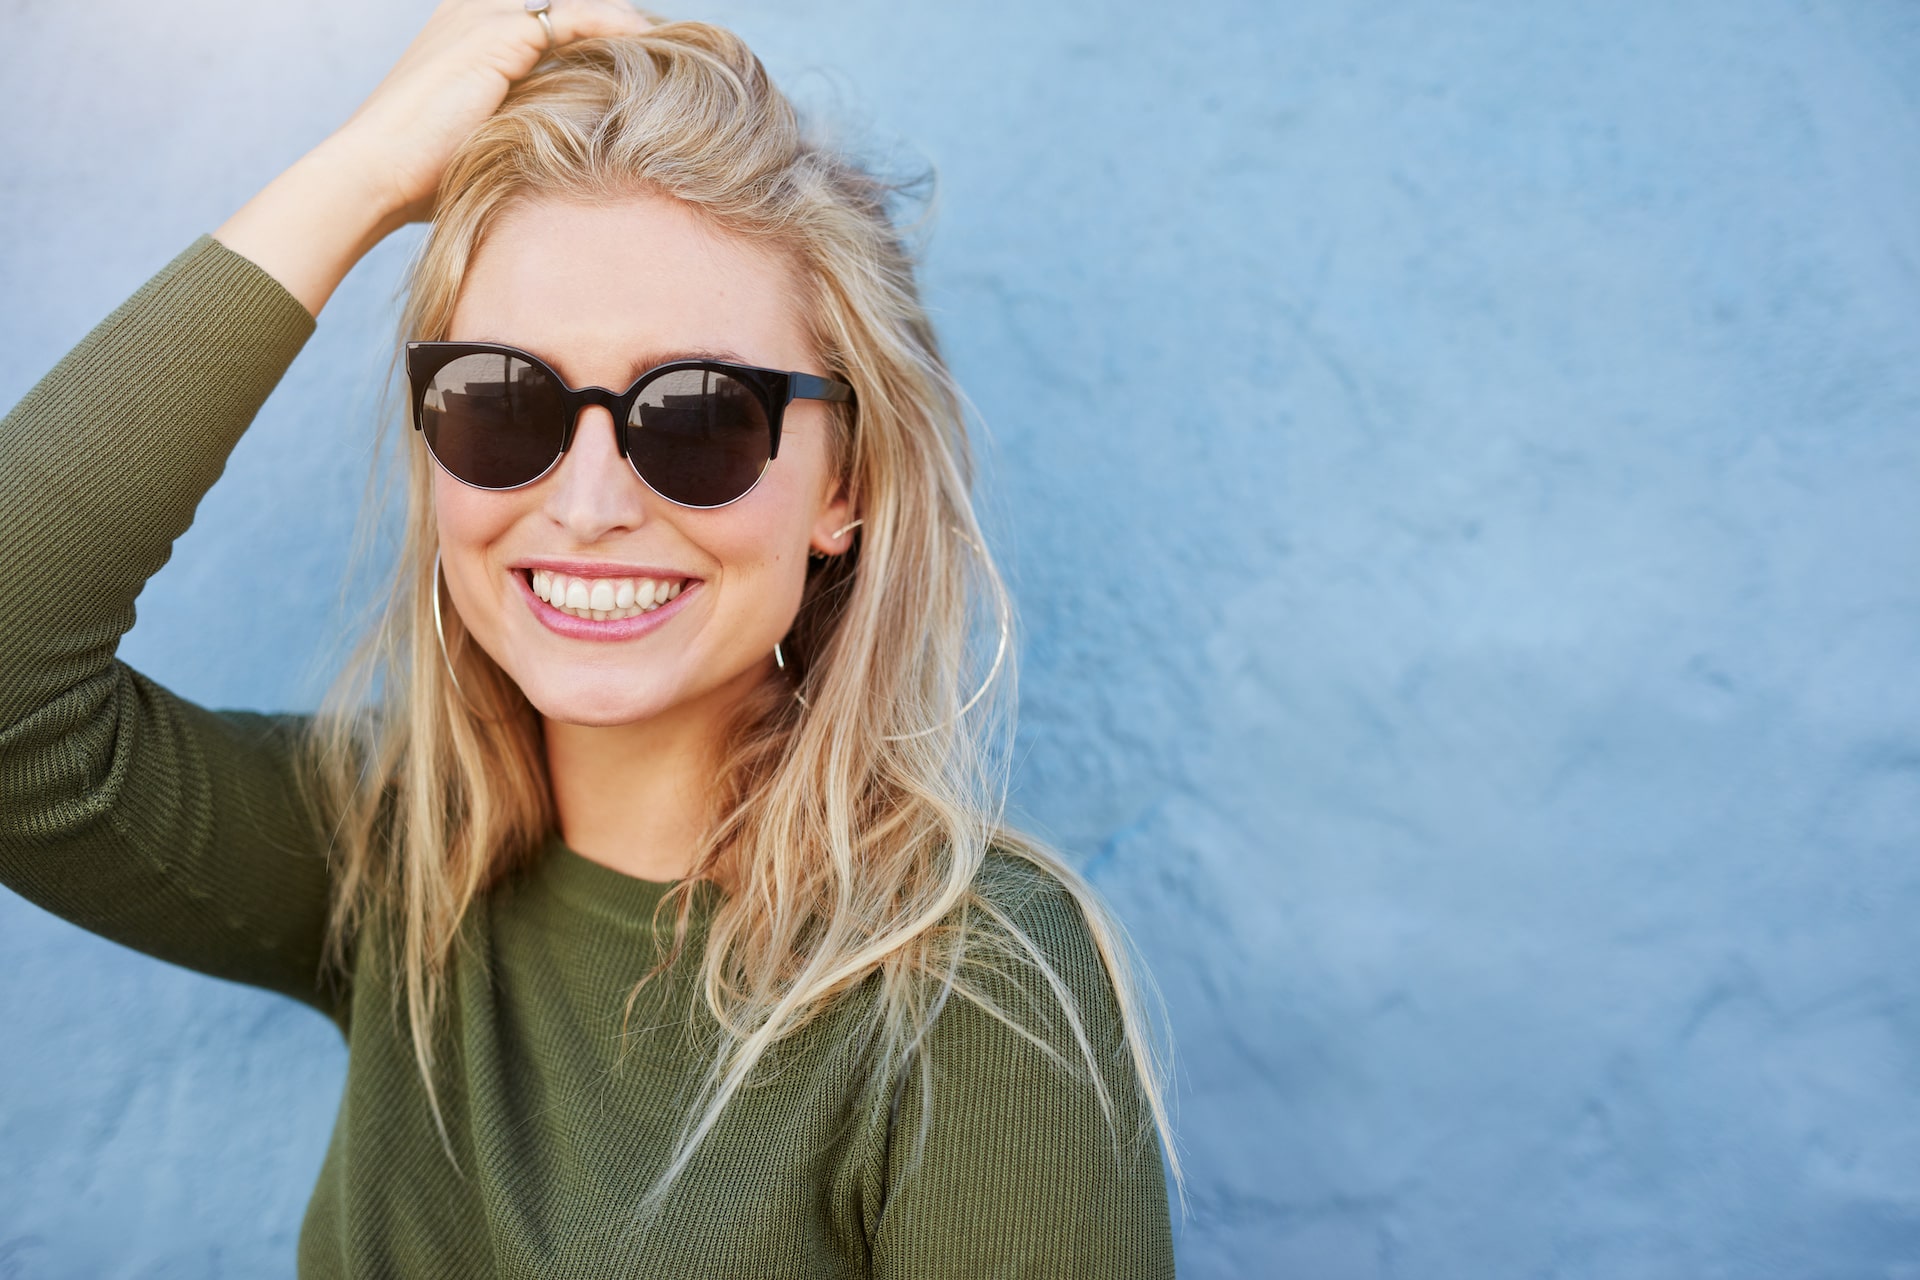 Woman in sunglasses smiling in front of blue wall